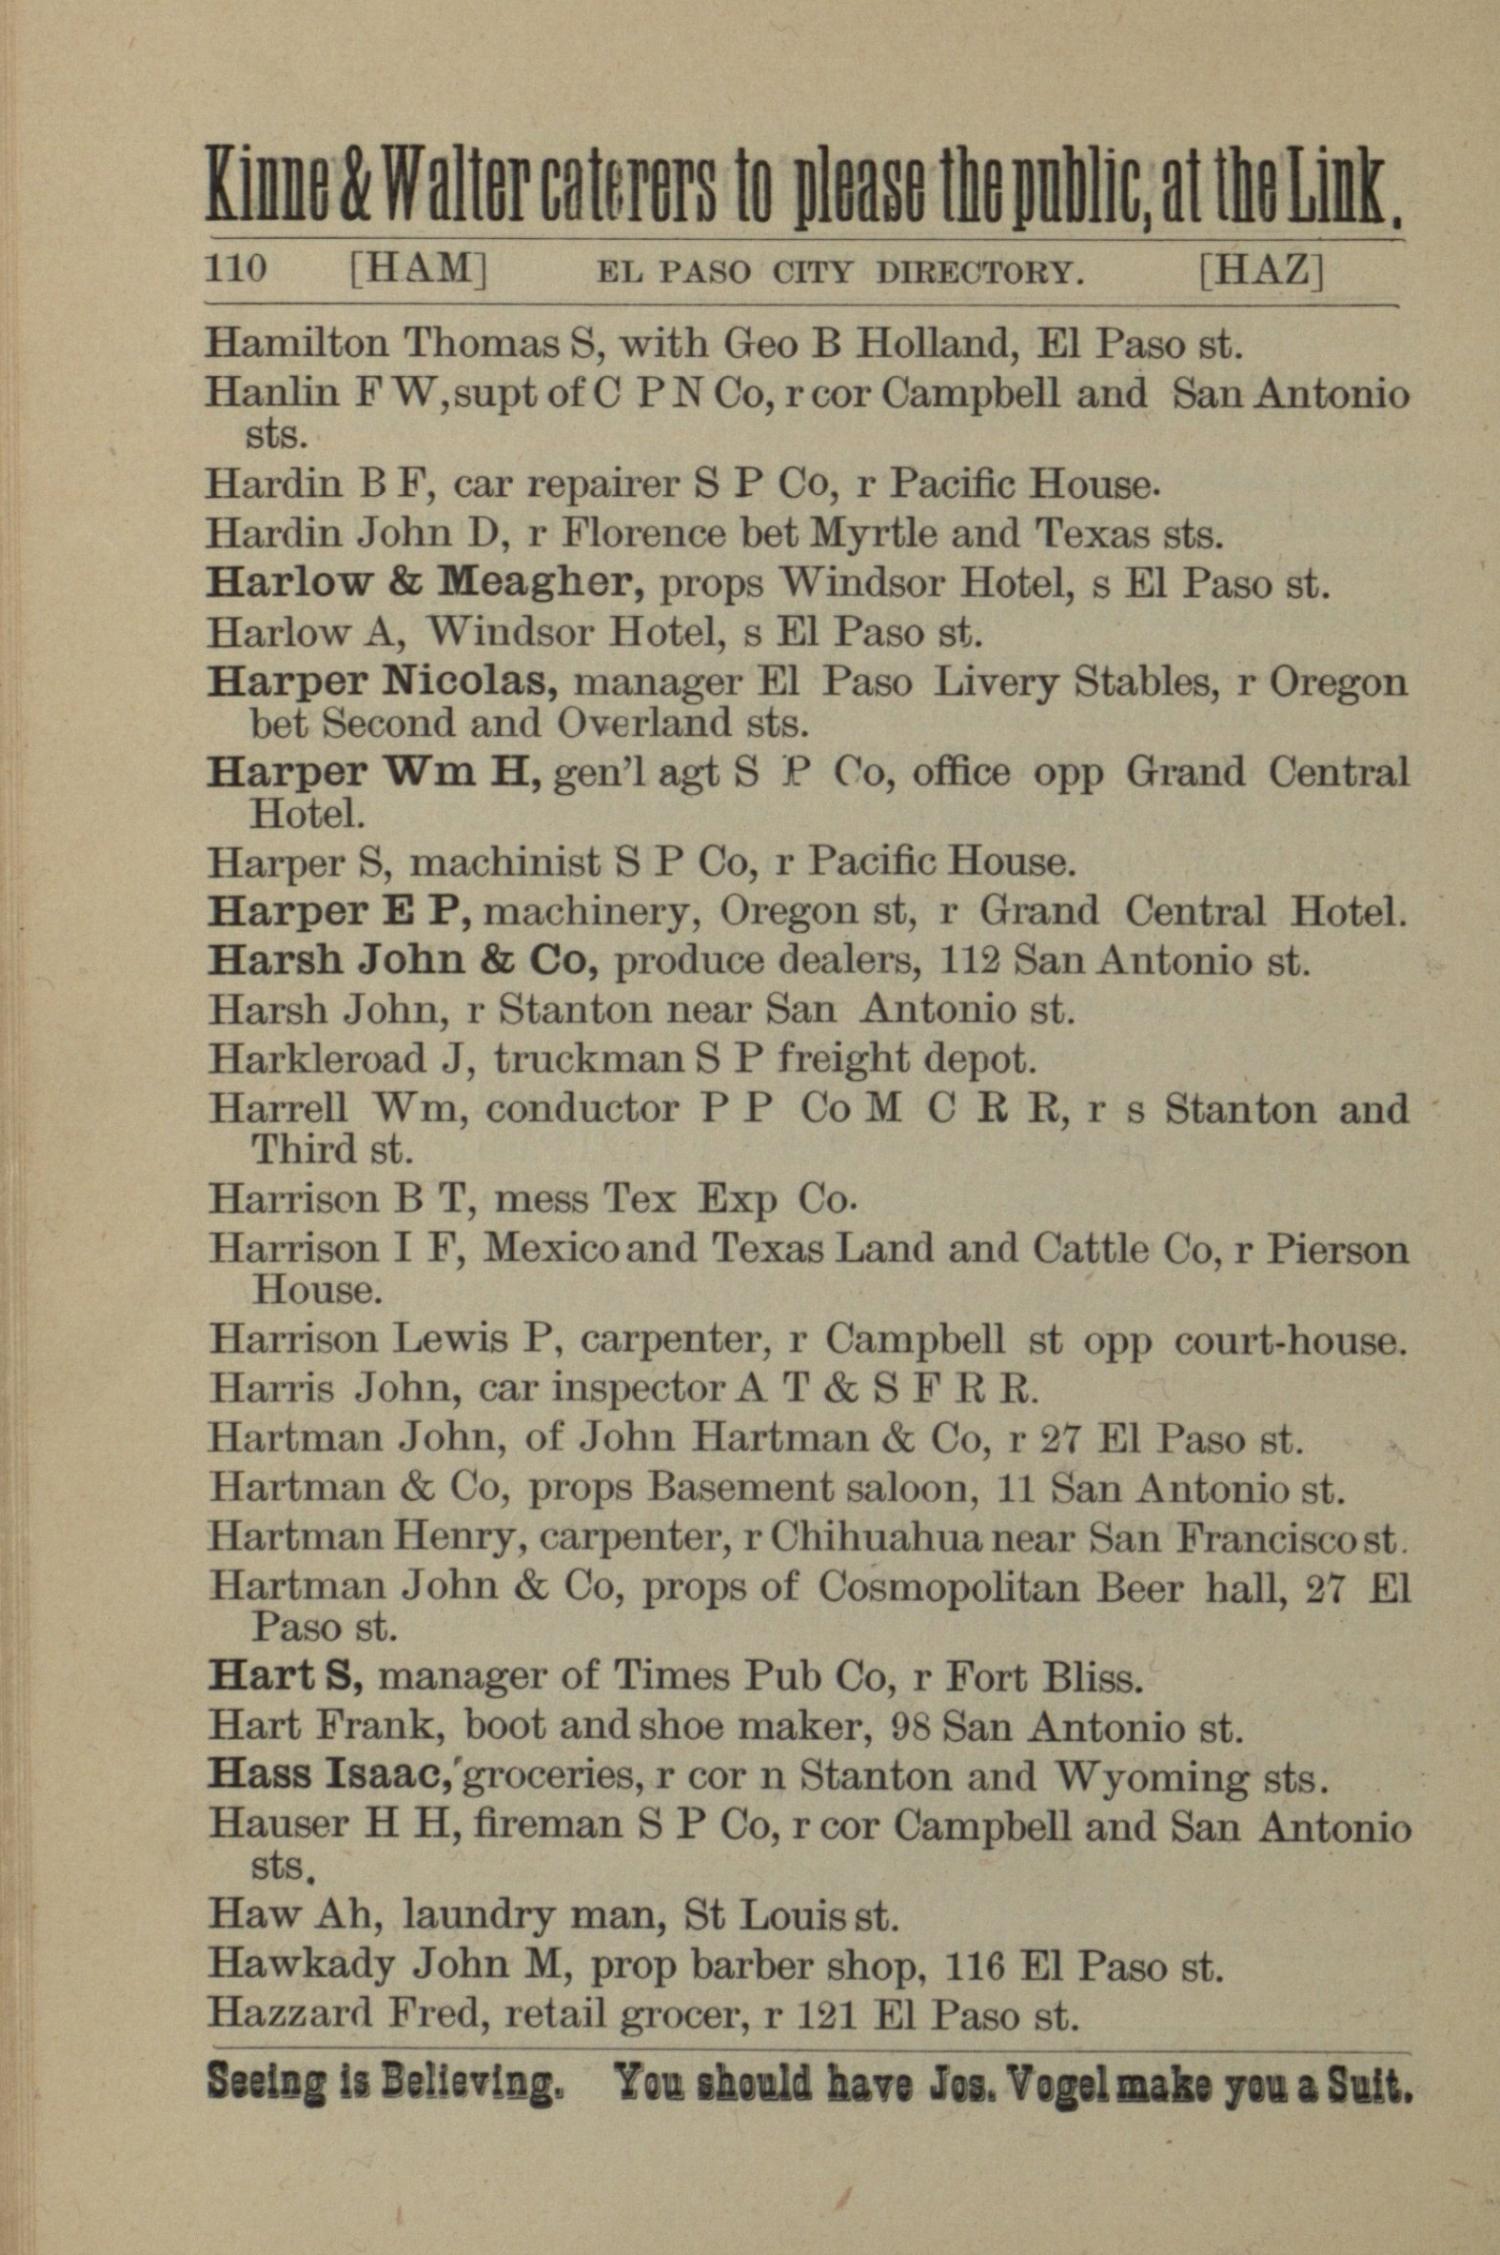 General Directory of the City of El Paso for 1886-87.
                                                
                                                    110
                                                